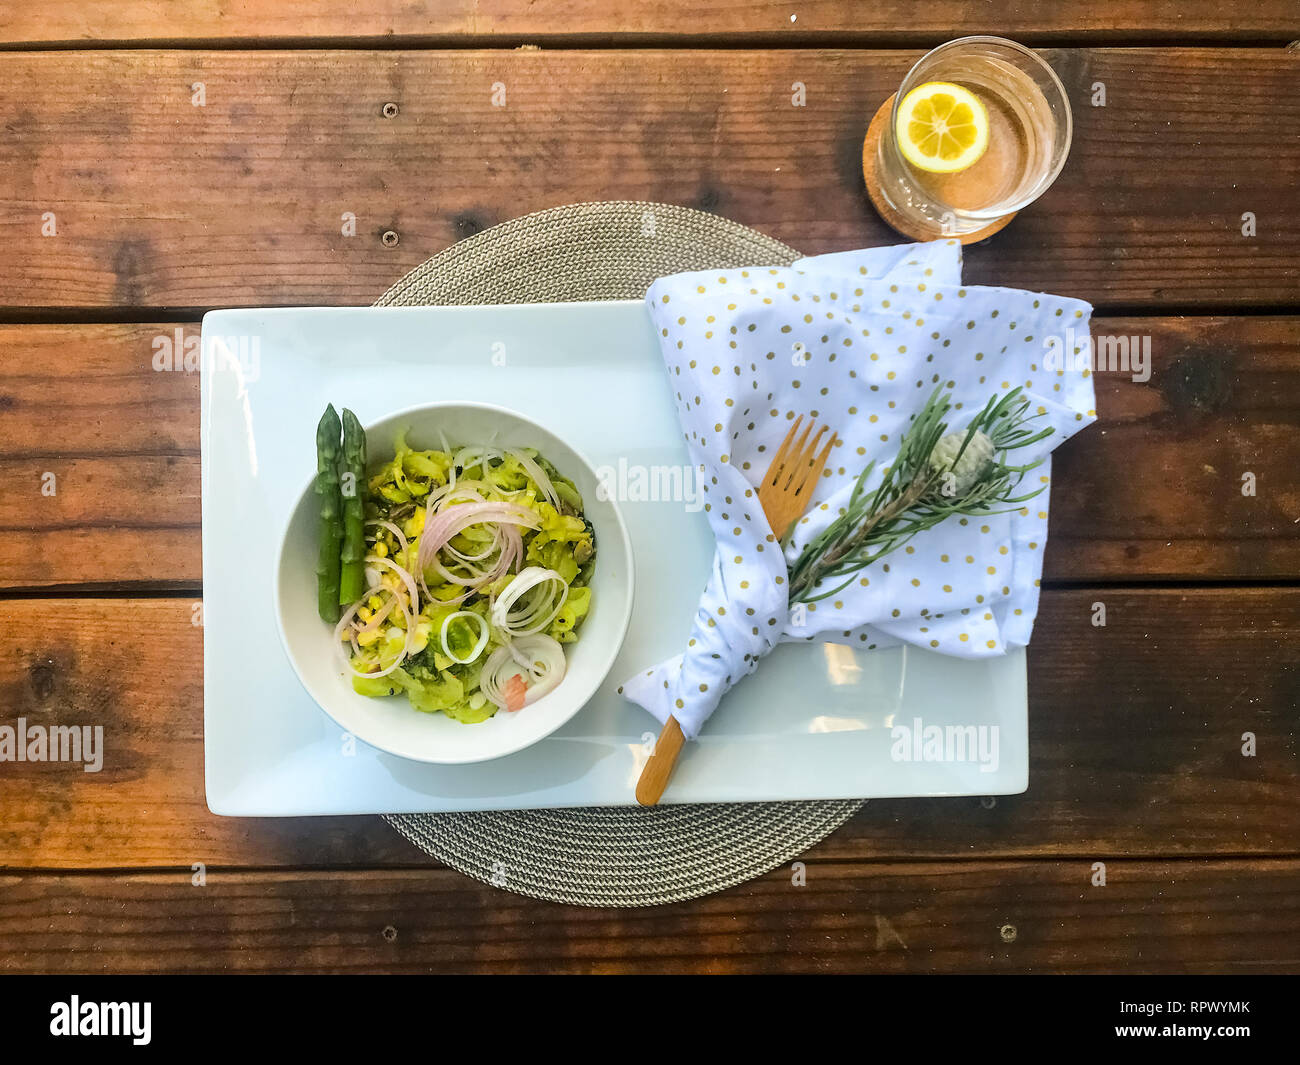 Vegeable salad as breakfast with asparagus and avocado Stock Photo